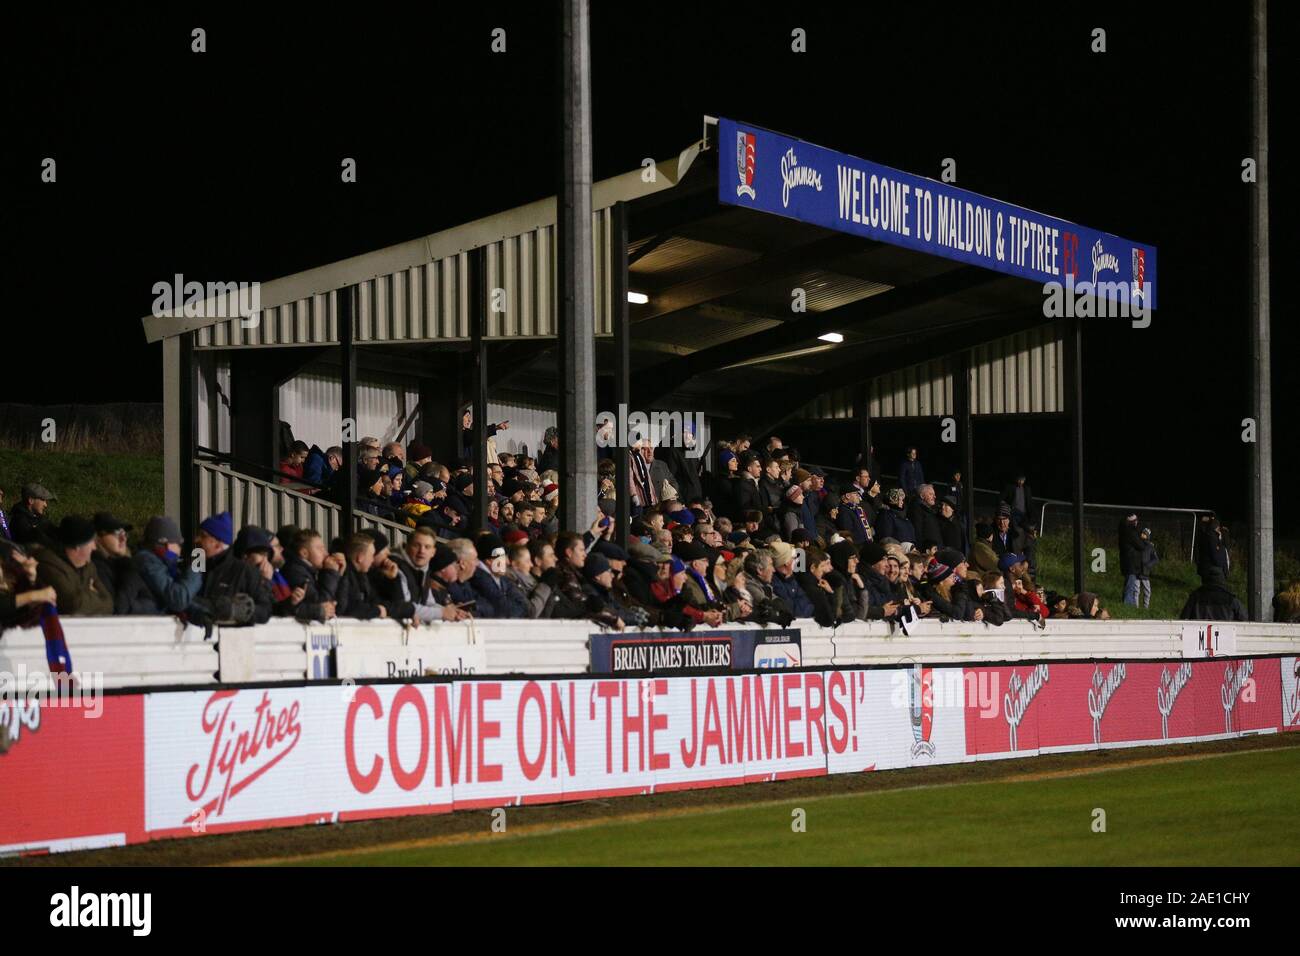 A bumper crowd in the main stand during Maldon & Tiptree vs Newport County, Emirates FA Cup Football at the Wallace Binder Ground on 29th November 201 Stock Photo